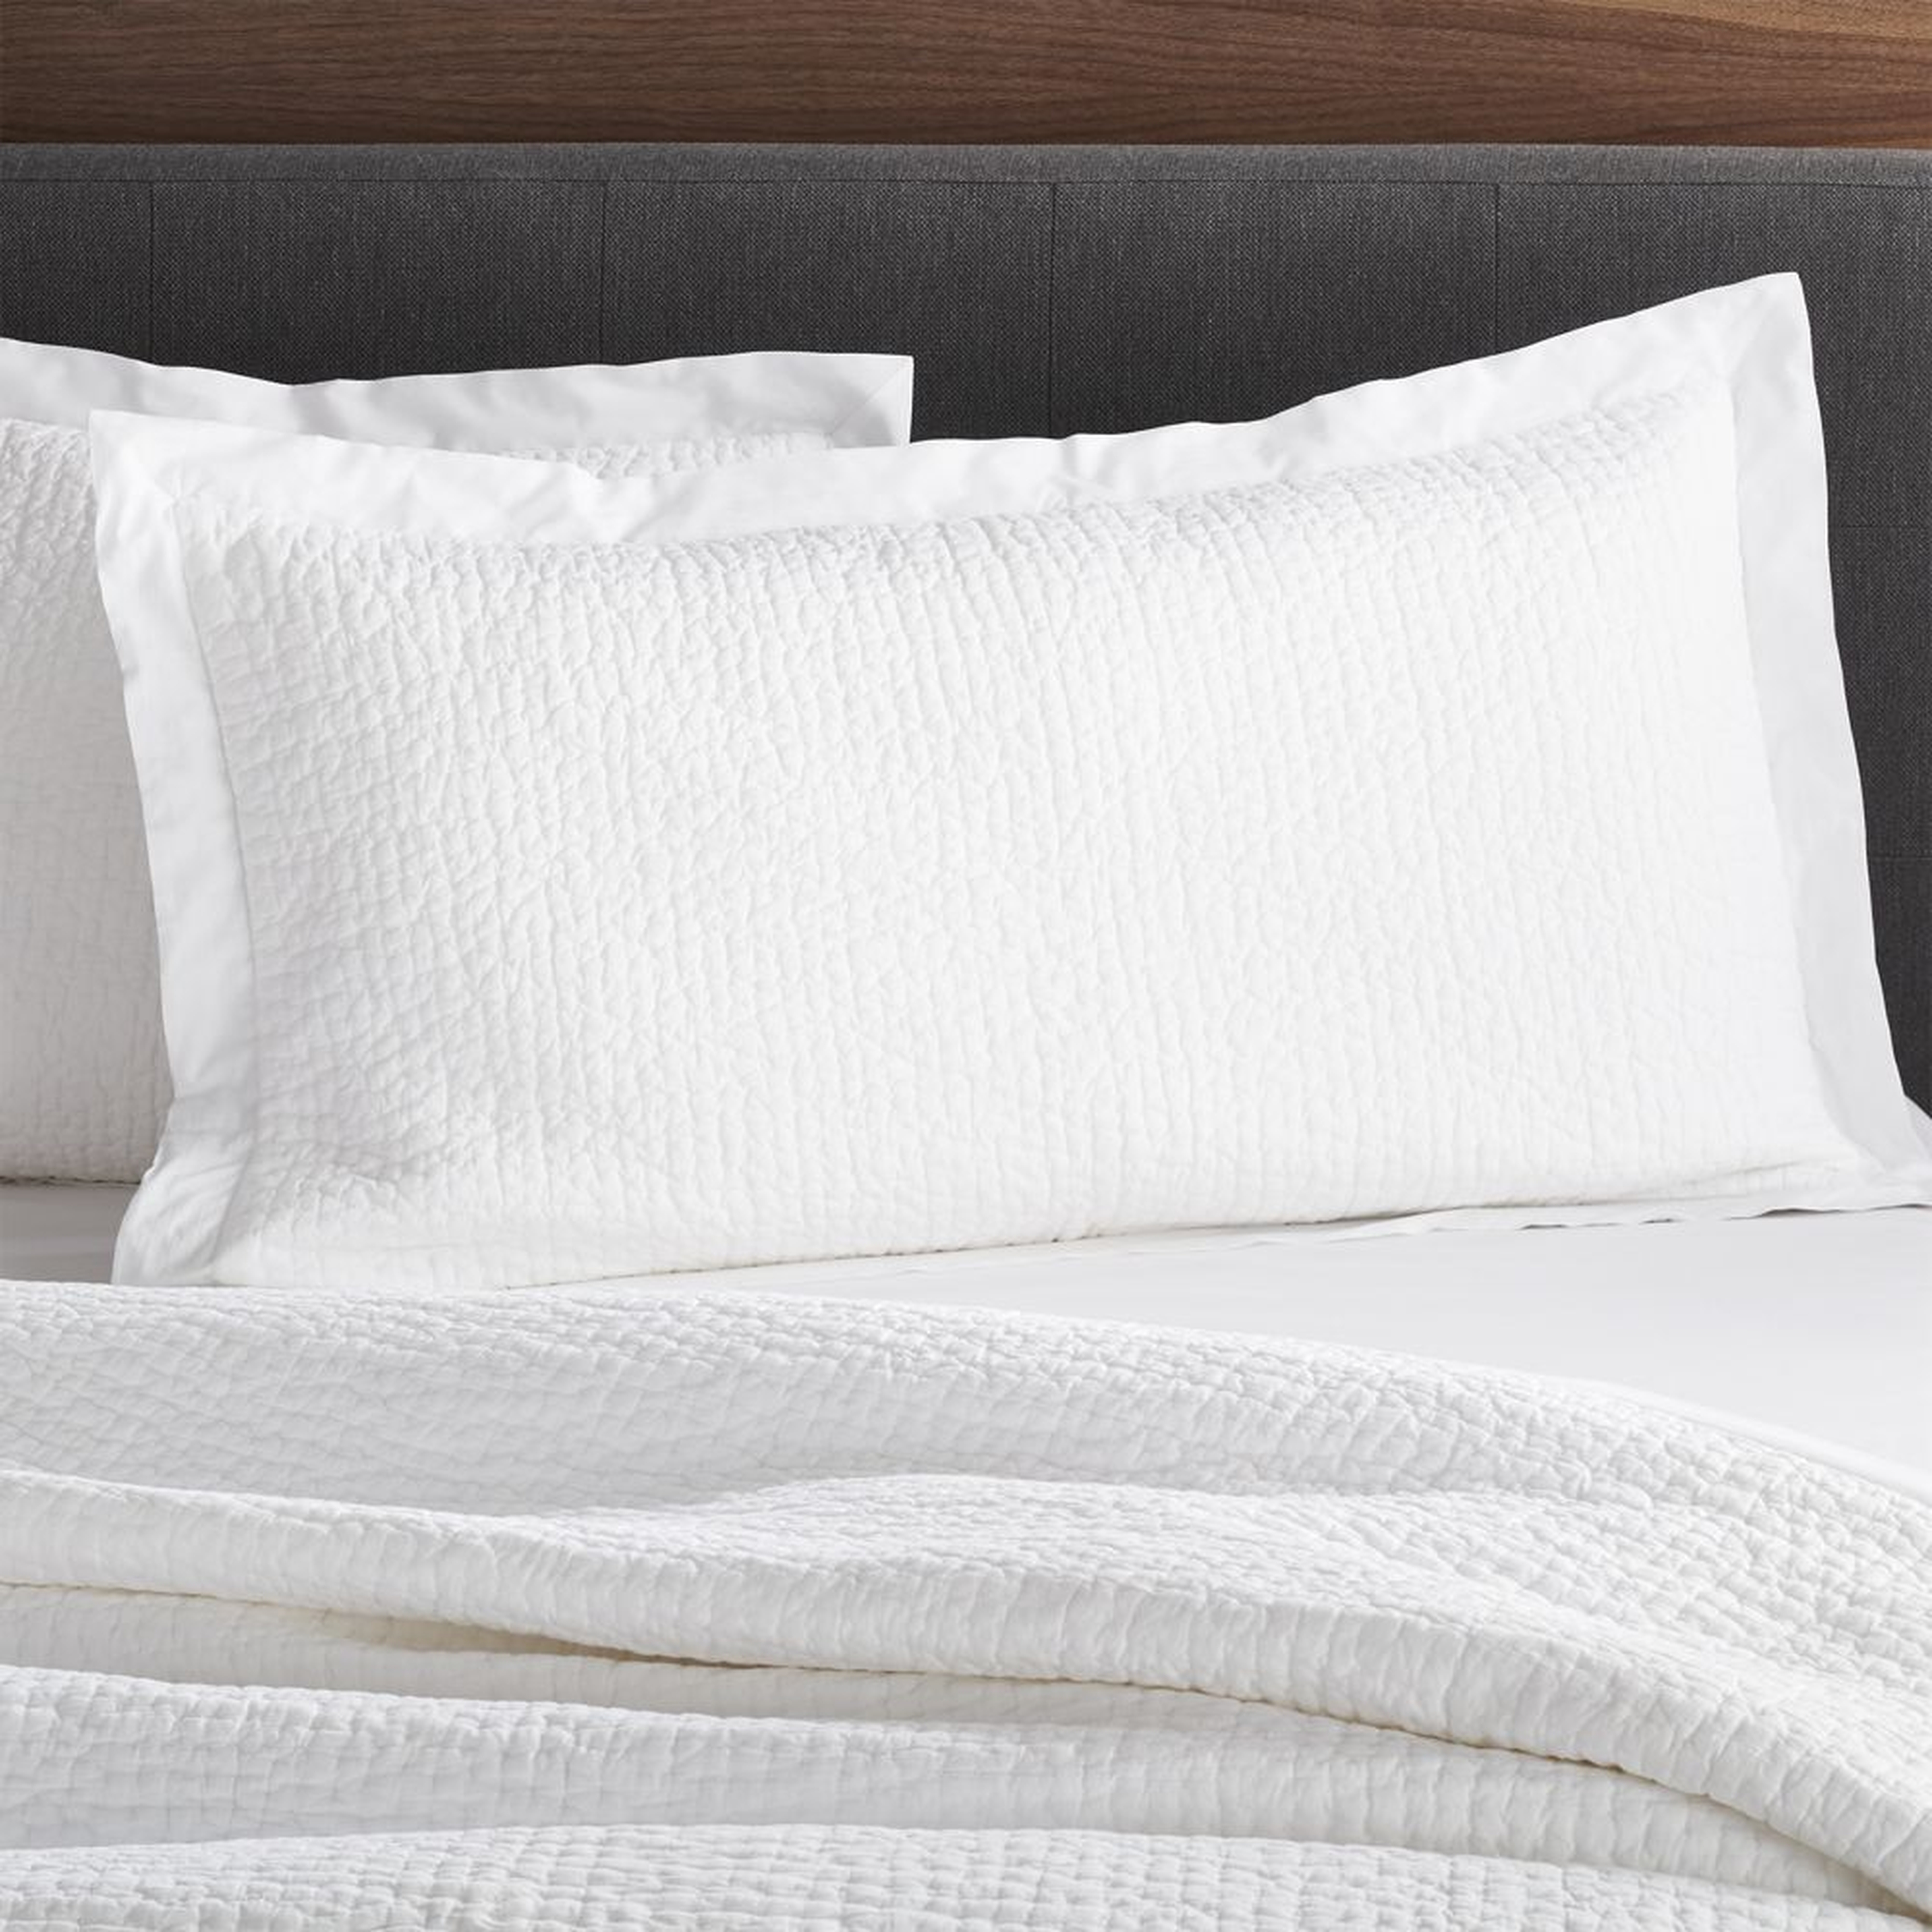 Celeste White Cotton Solid King Sham - Crate and Barrel